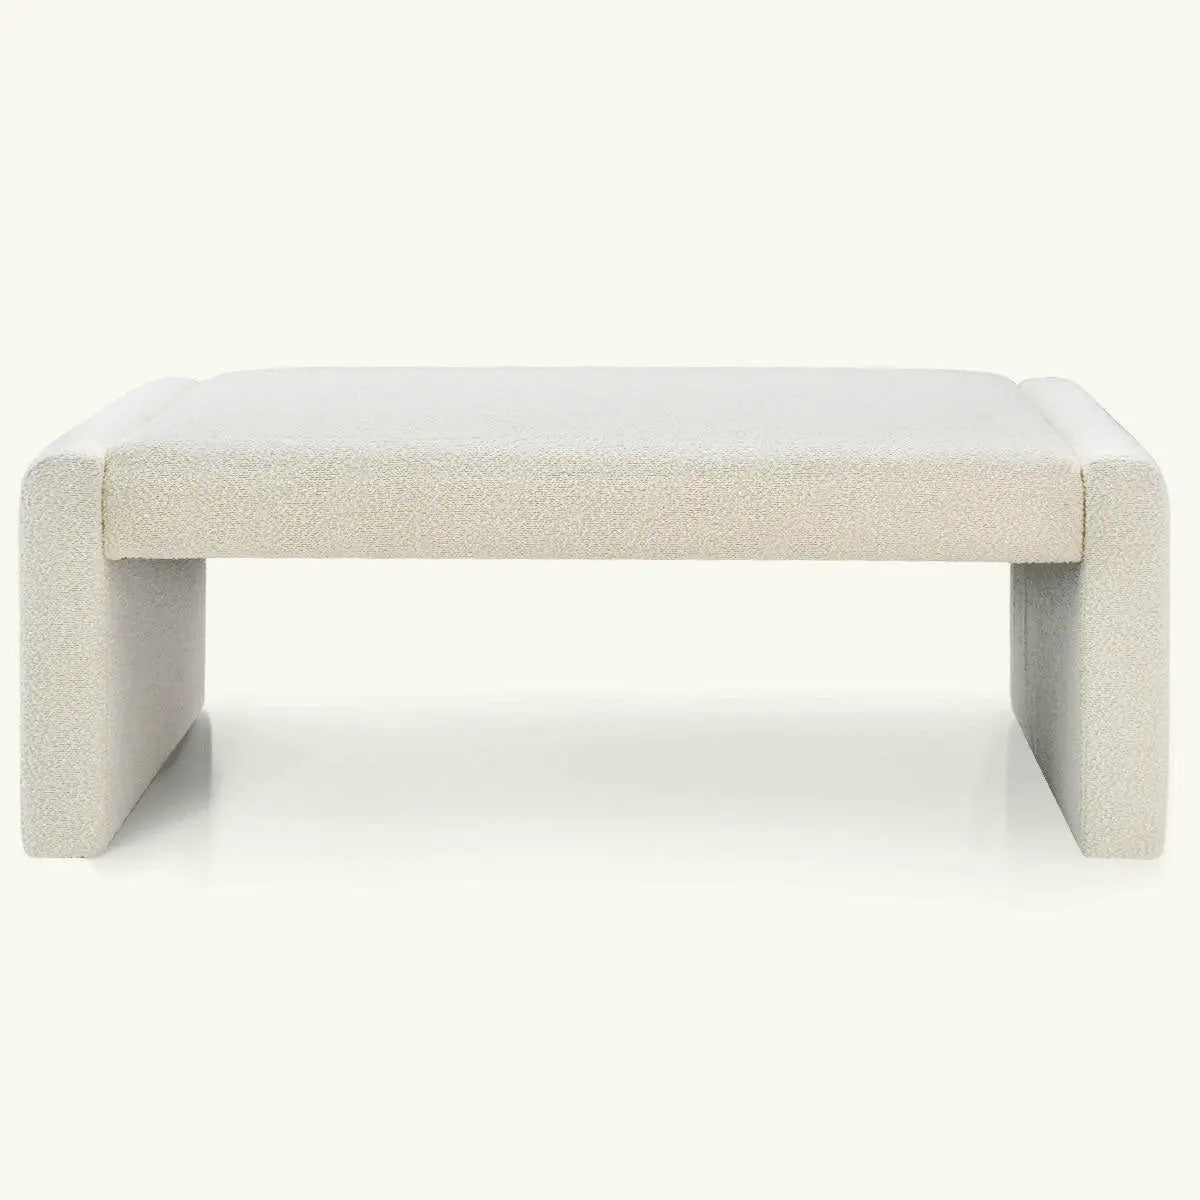 Kaia 47" Sherpa Bedroom Bench - Cozy and Stylish Furniture Addition